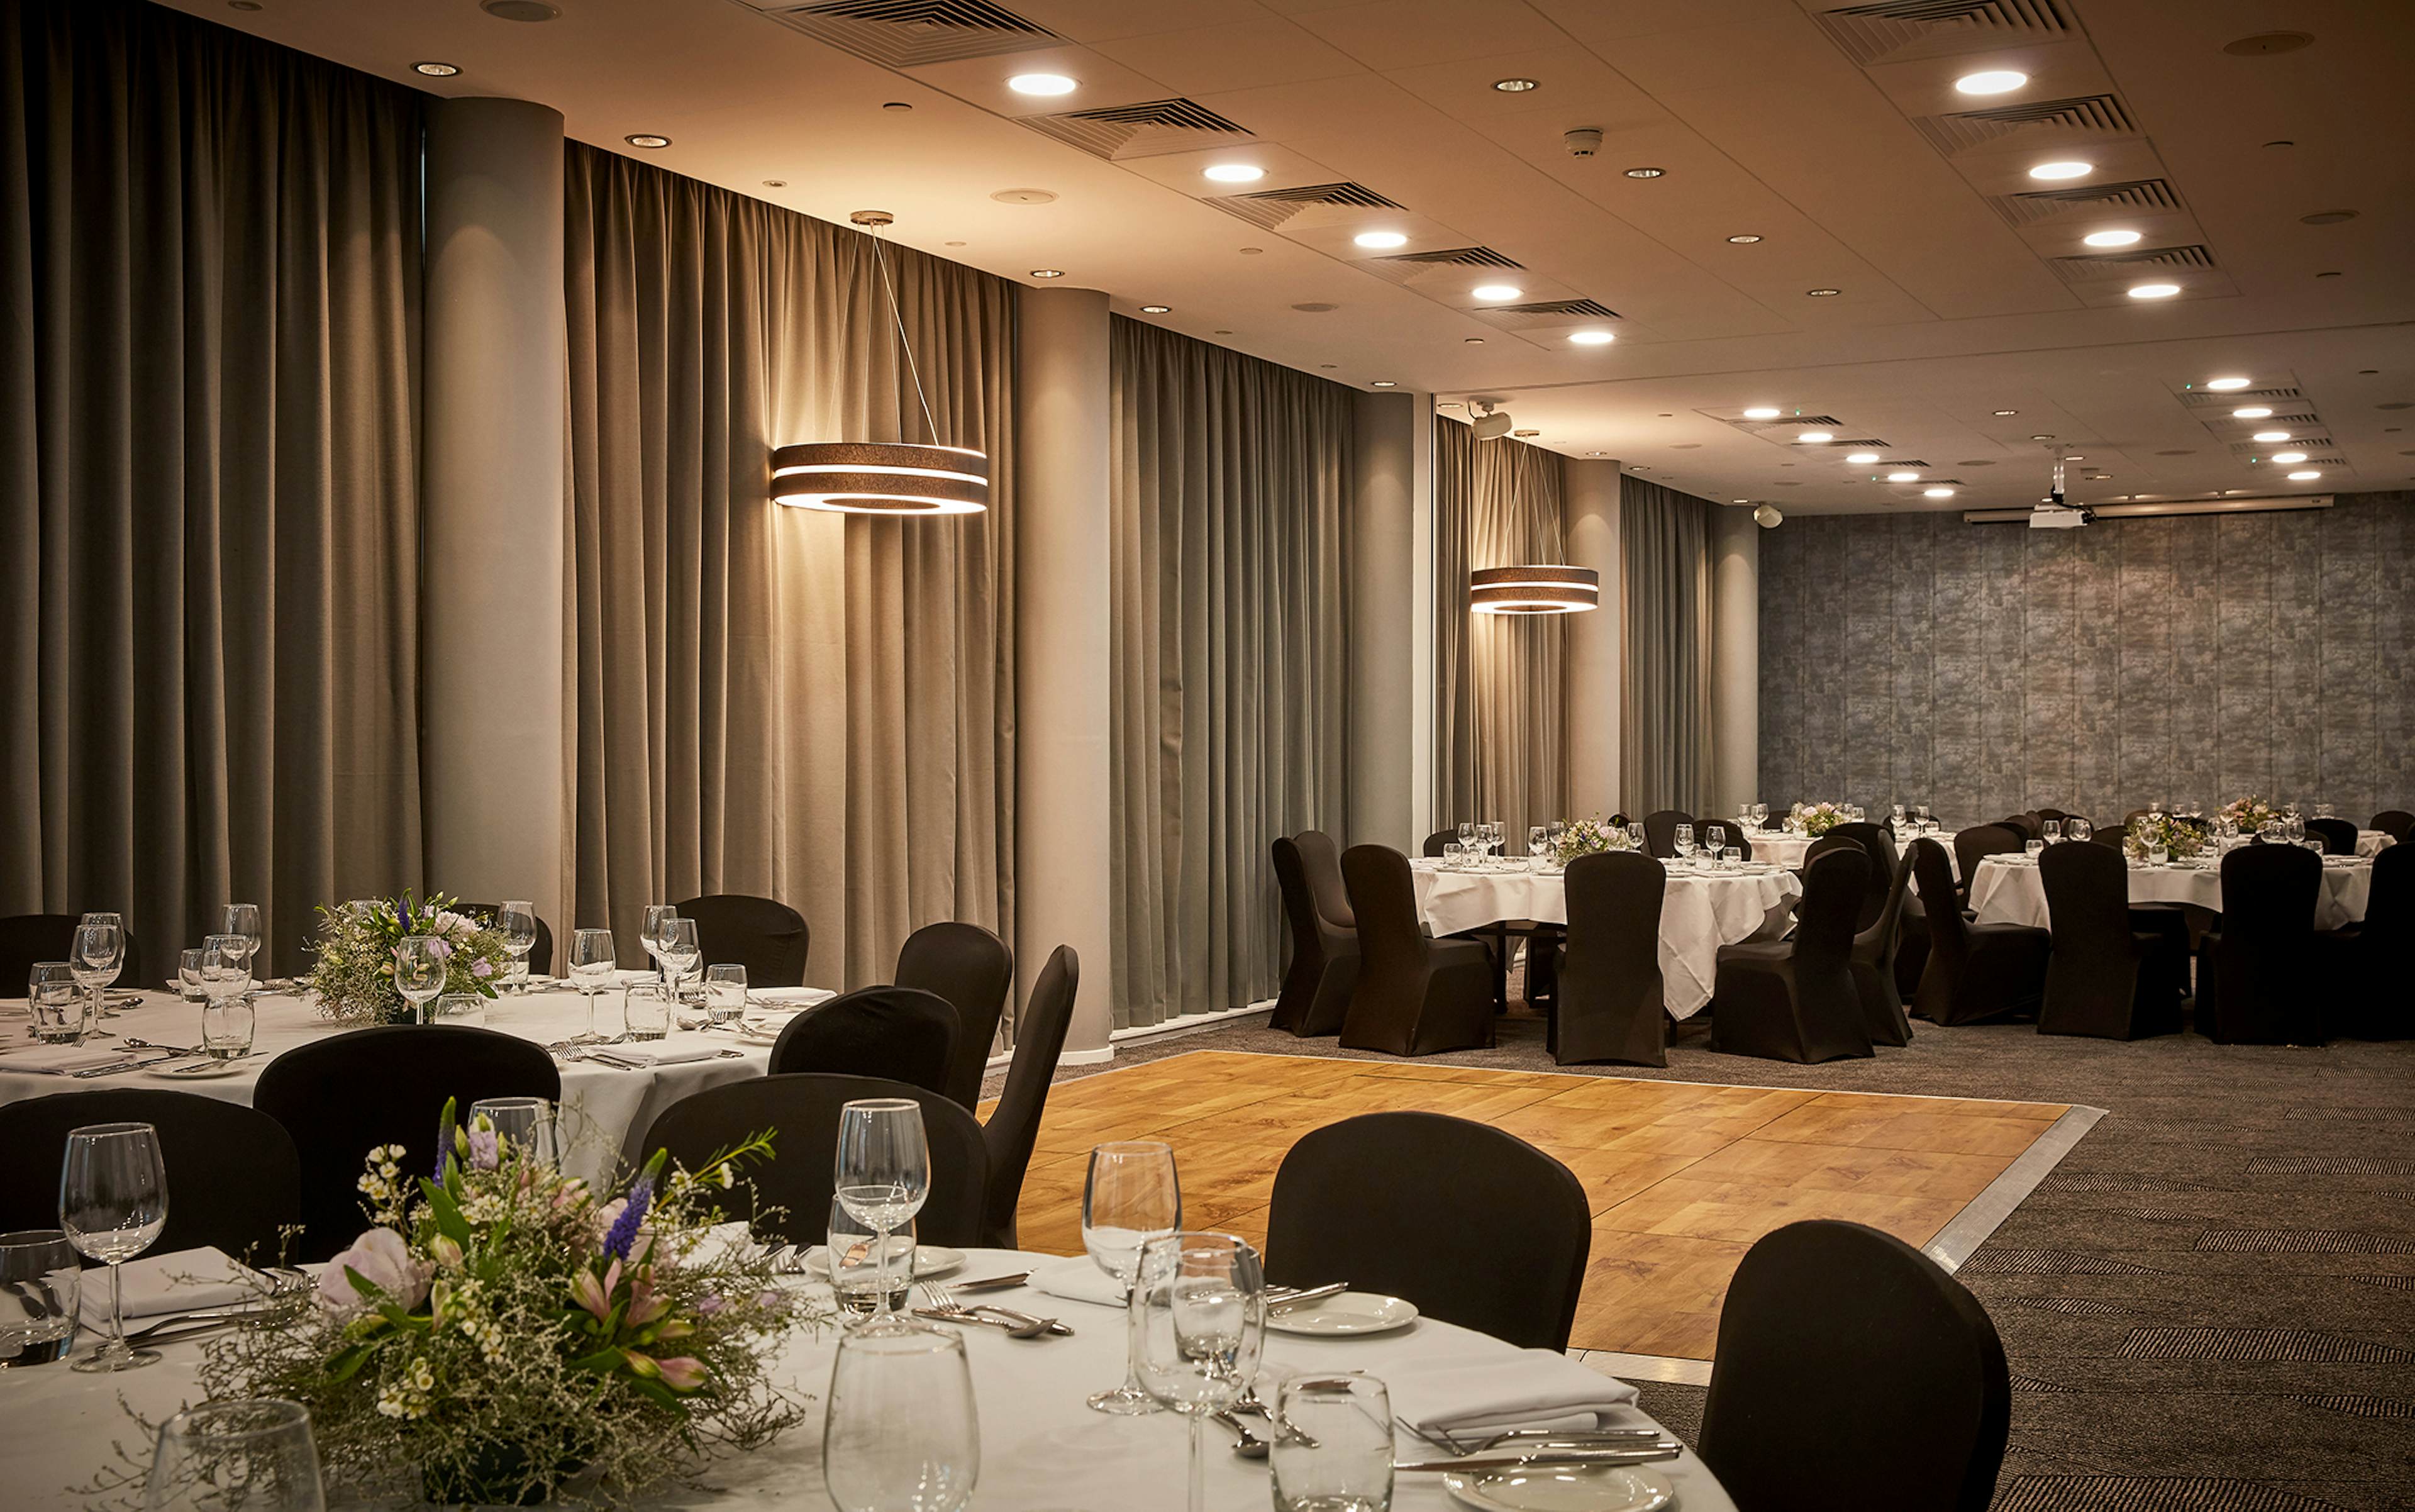 DoubleTree by Hilton Manchester - Palaces image 1